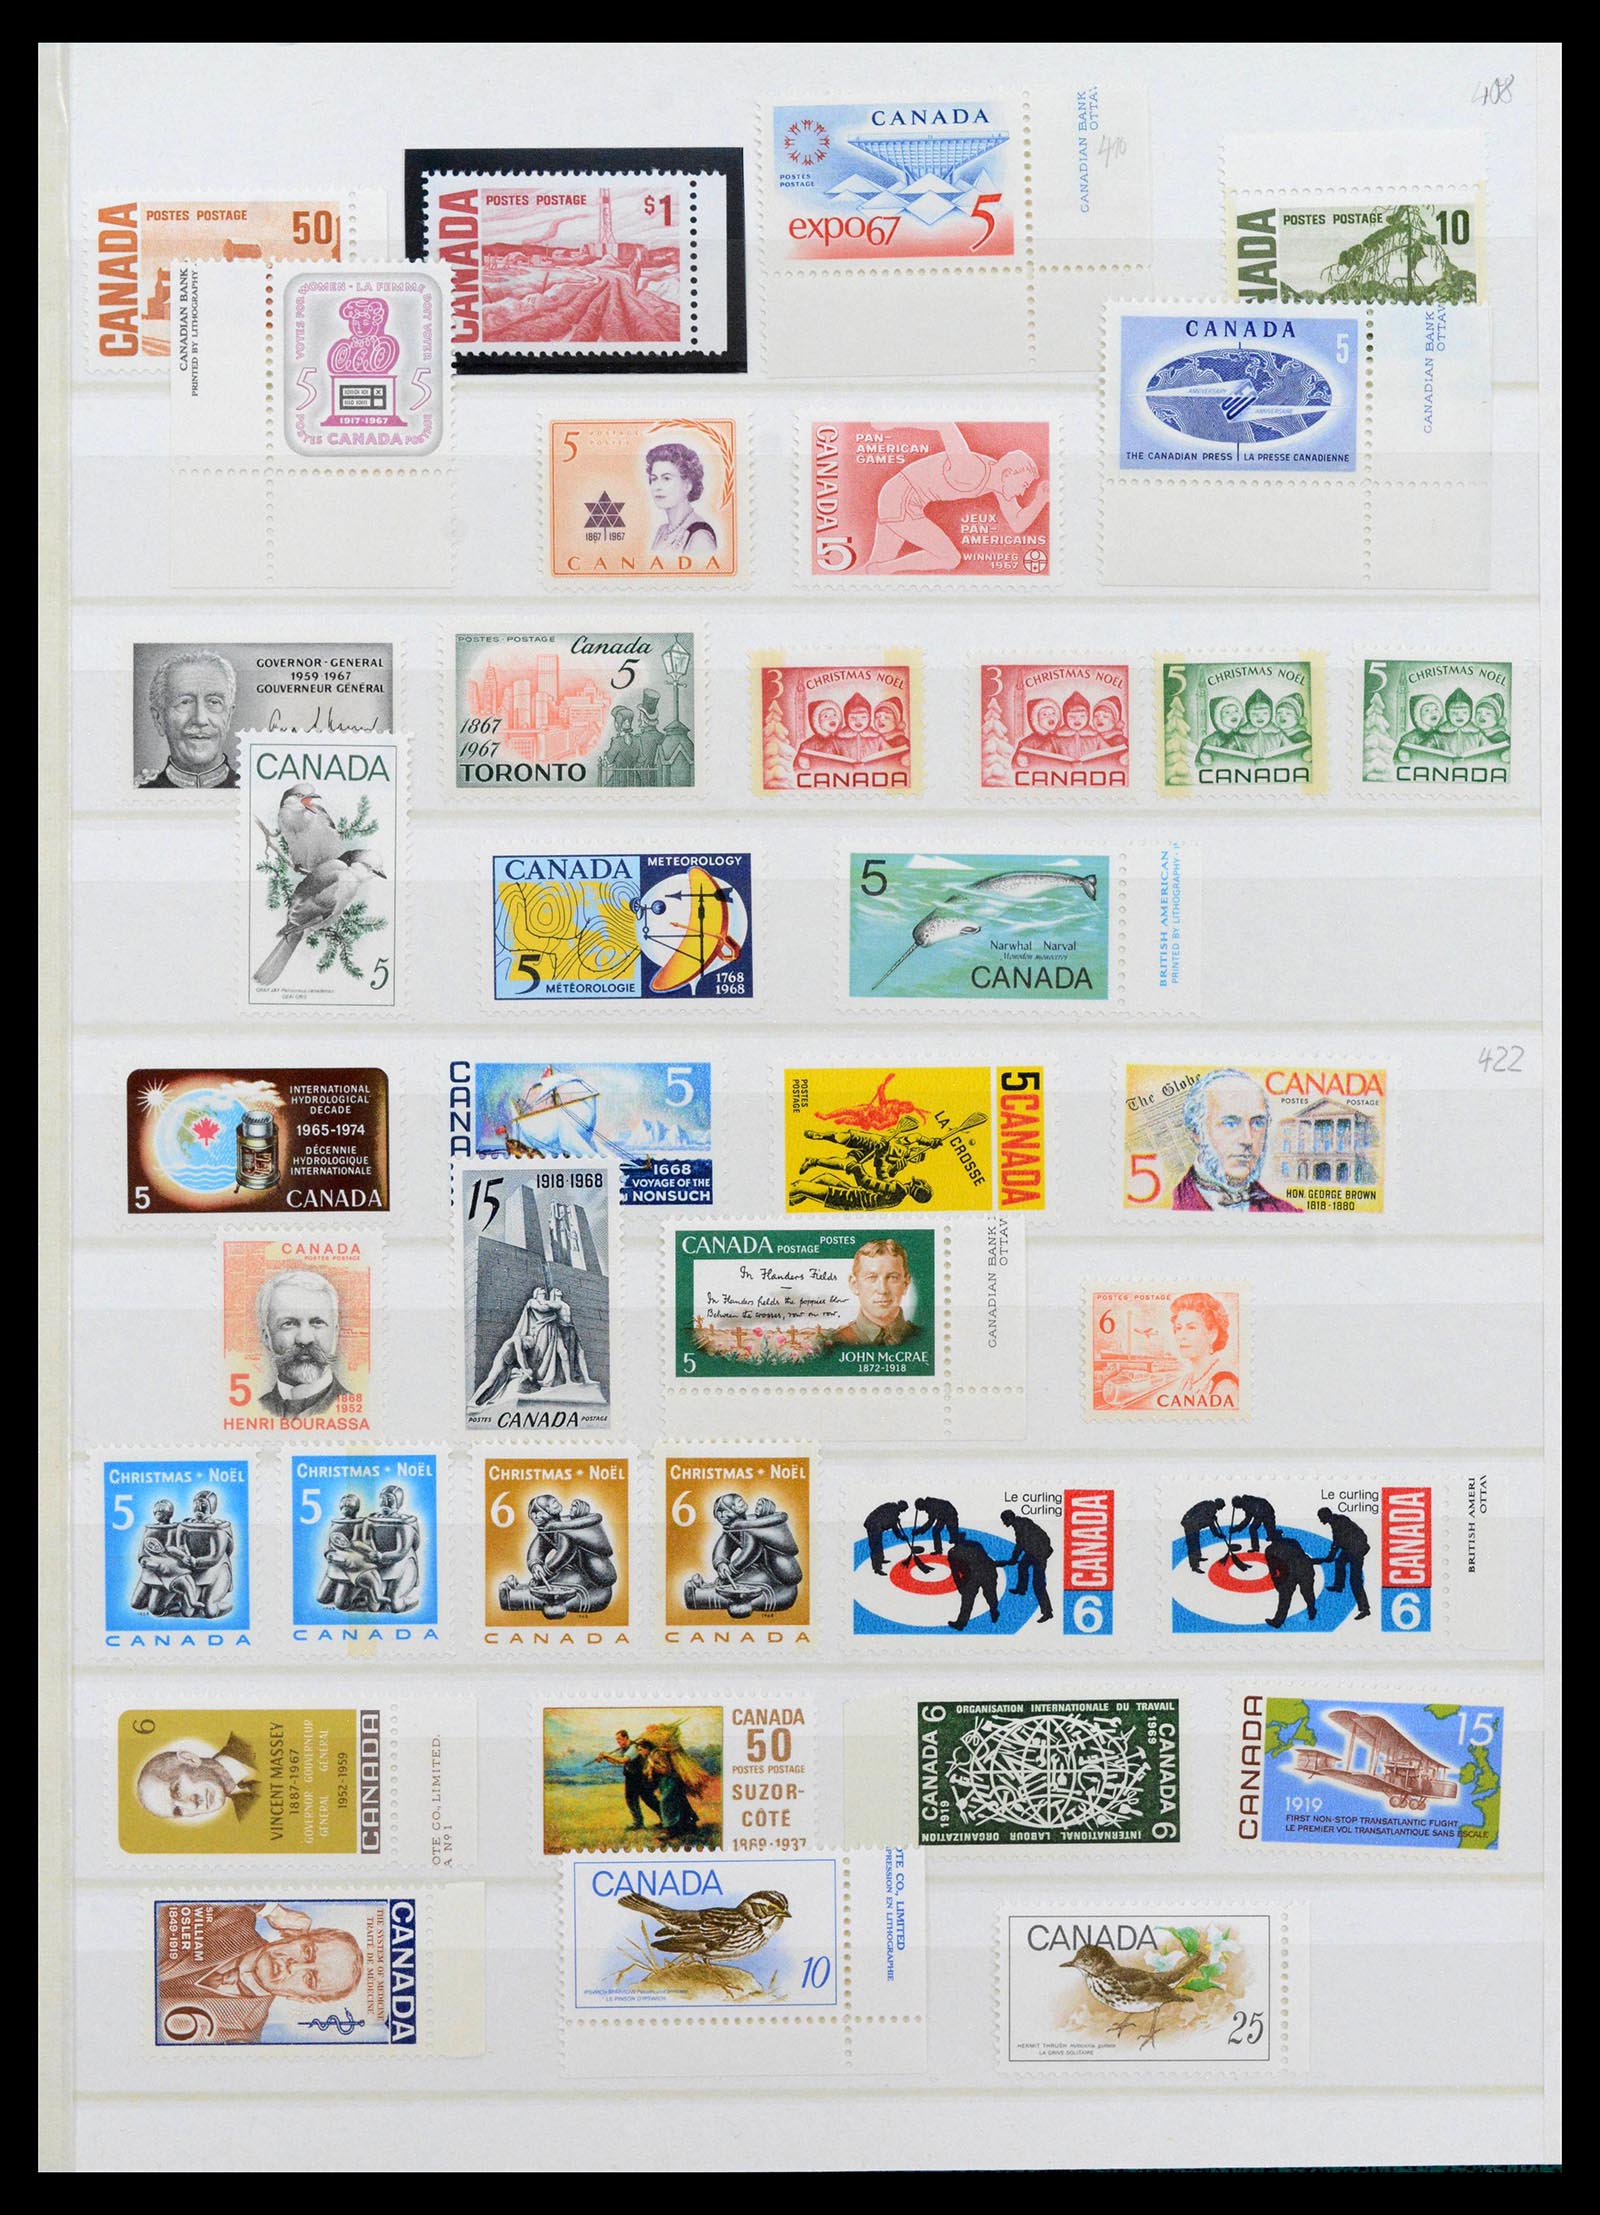 39199 0032 - Stamp collection 39199 Canada and provinces 1851-1970.